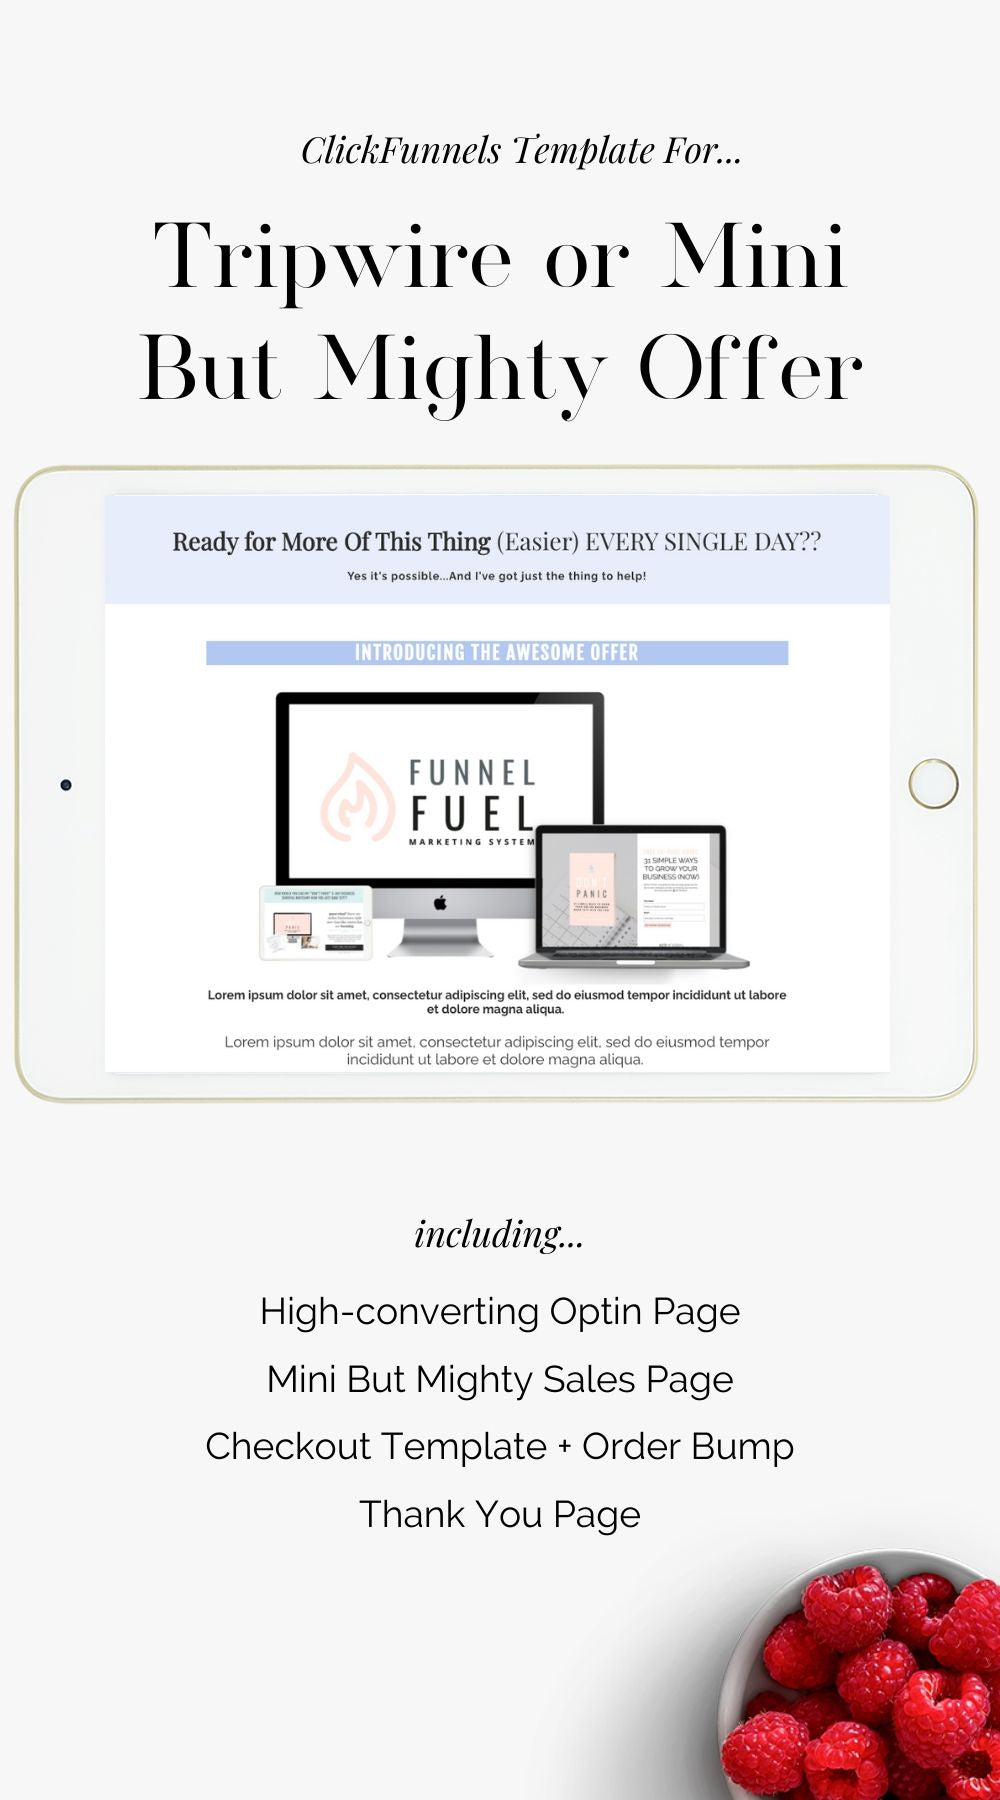 Optin Page - Powered by ClickFunnels.com